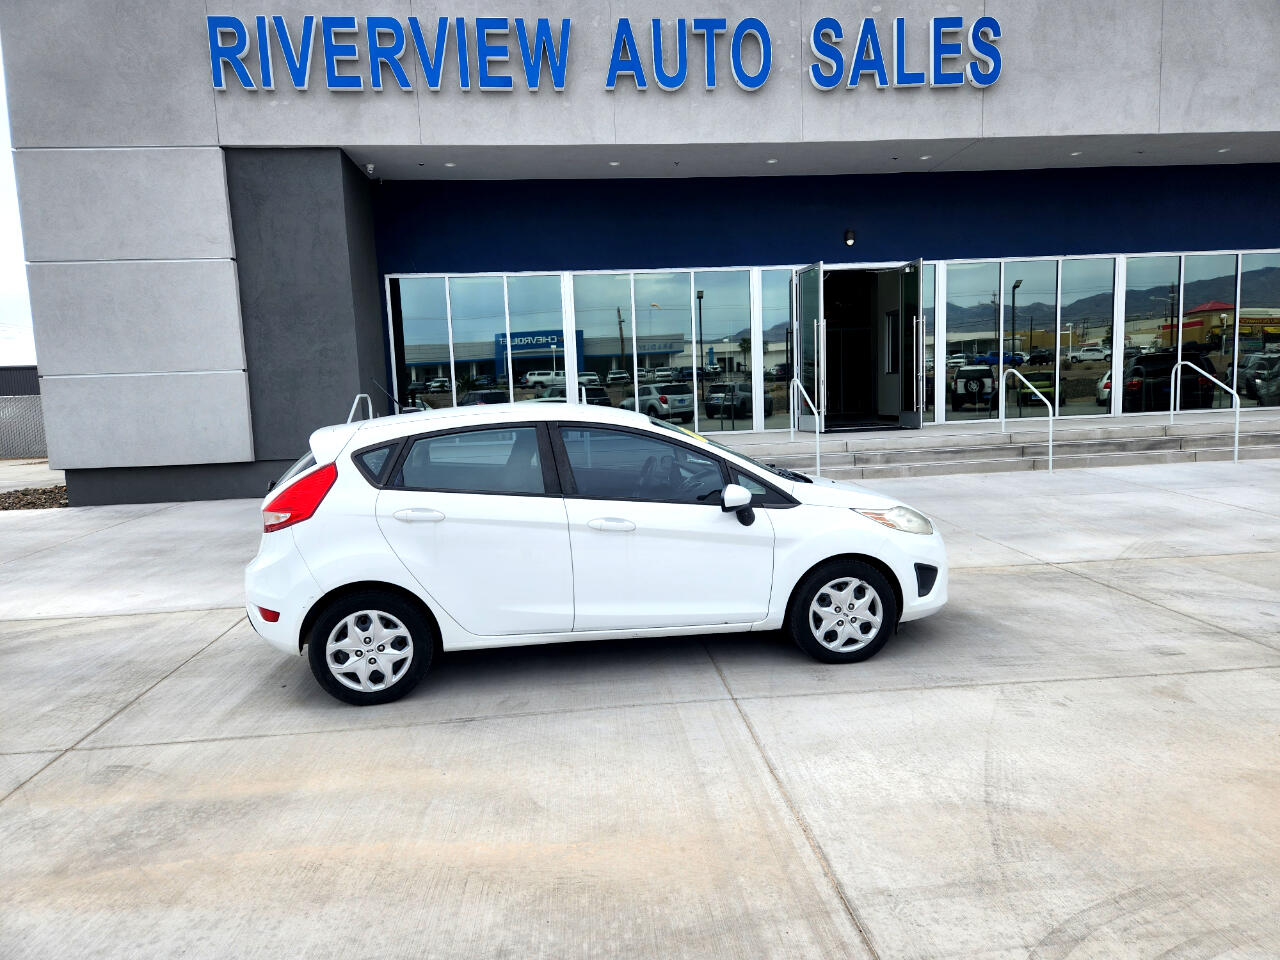 Used 2012 Ford Fiesta SE with VIN 3FADP4EJXCM173411 for sale in Havasu City, AZ